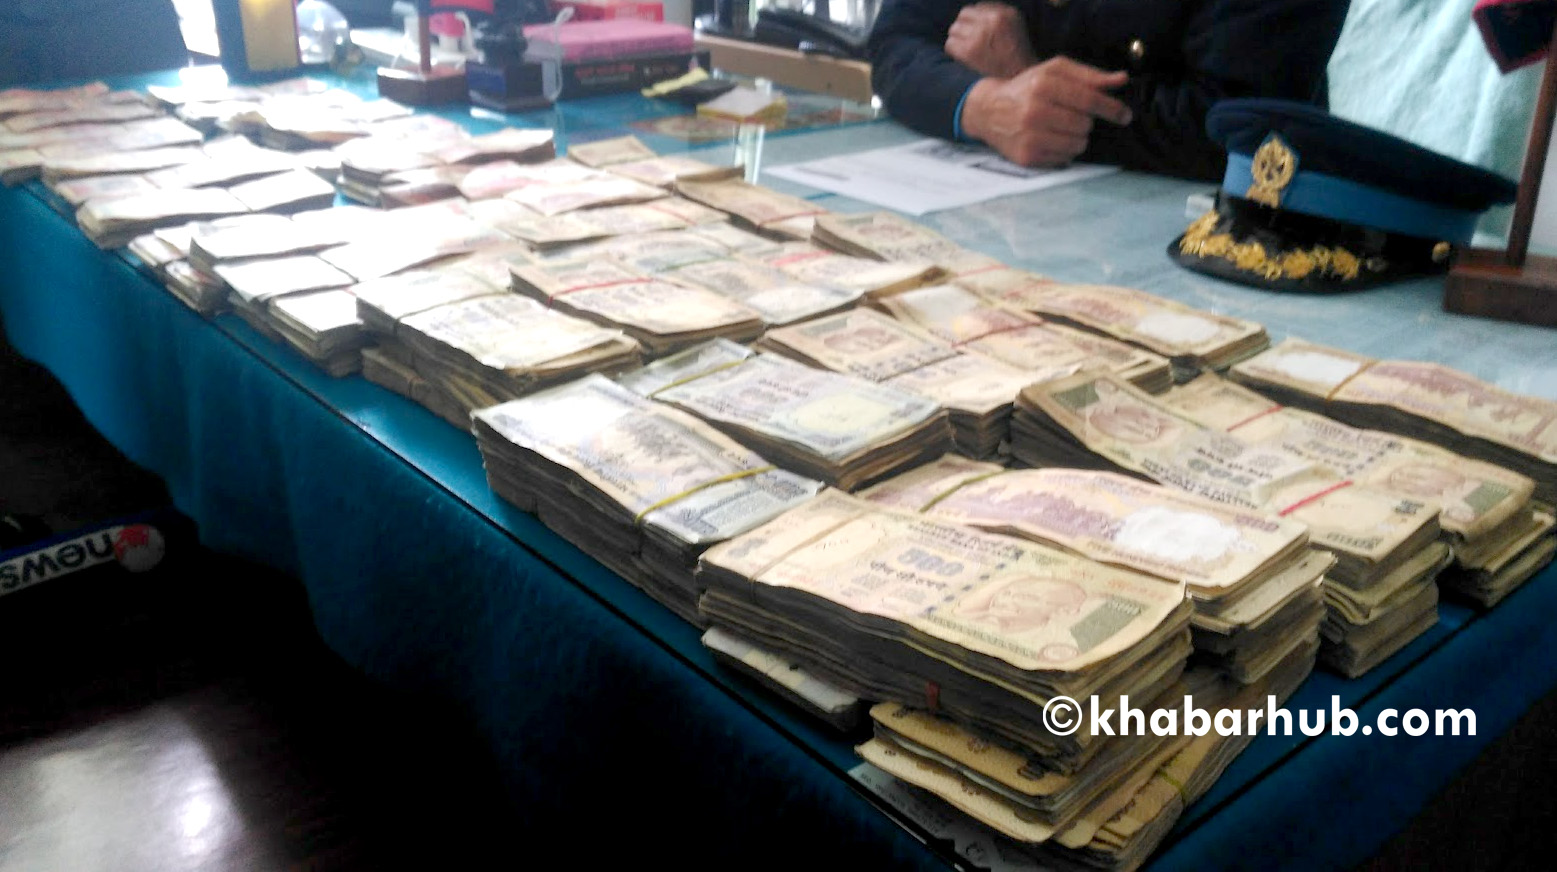 Four arrested with 529,000 Indian rupees in Nepal